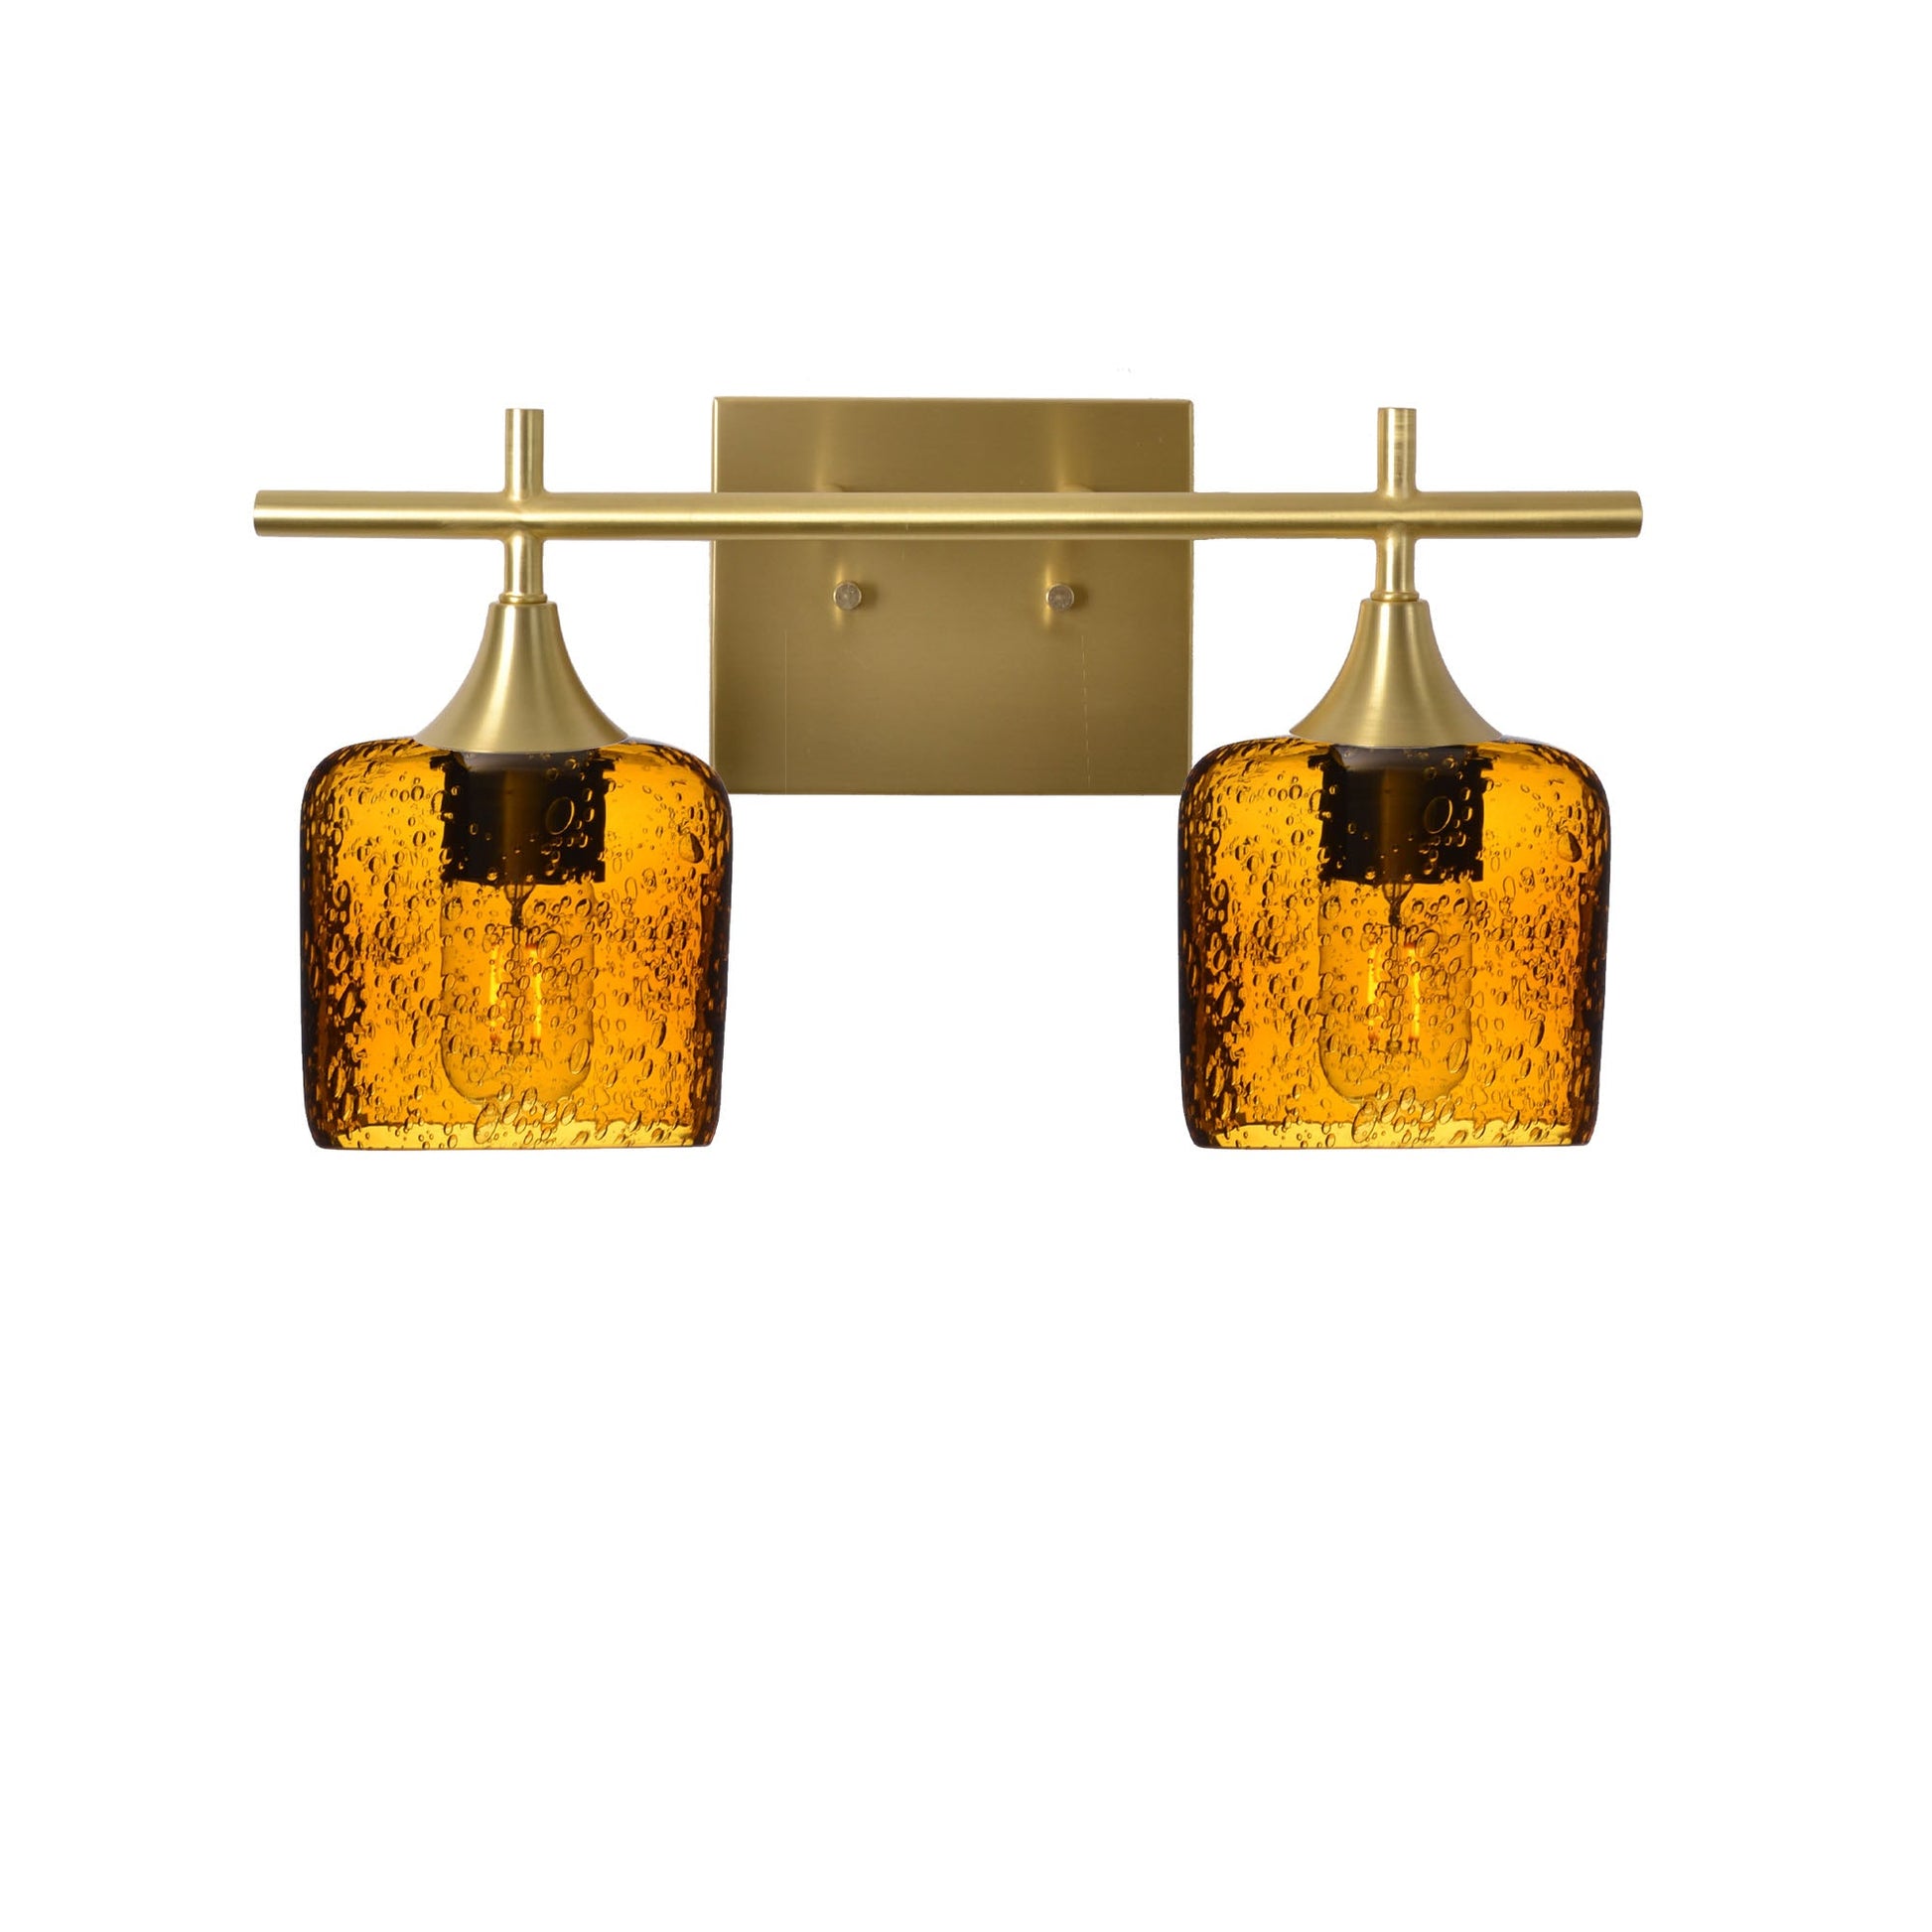 601 Lunar: 2 Light Wall Vanity-Glass-Bicycle Glass Co - Hotshop-Golden Amber-Satin Brass-Bicycle Glass Co